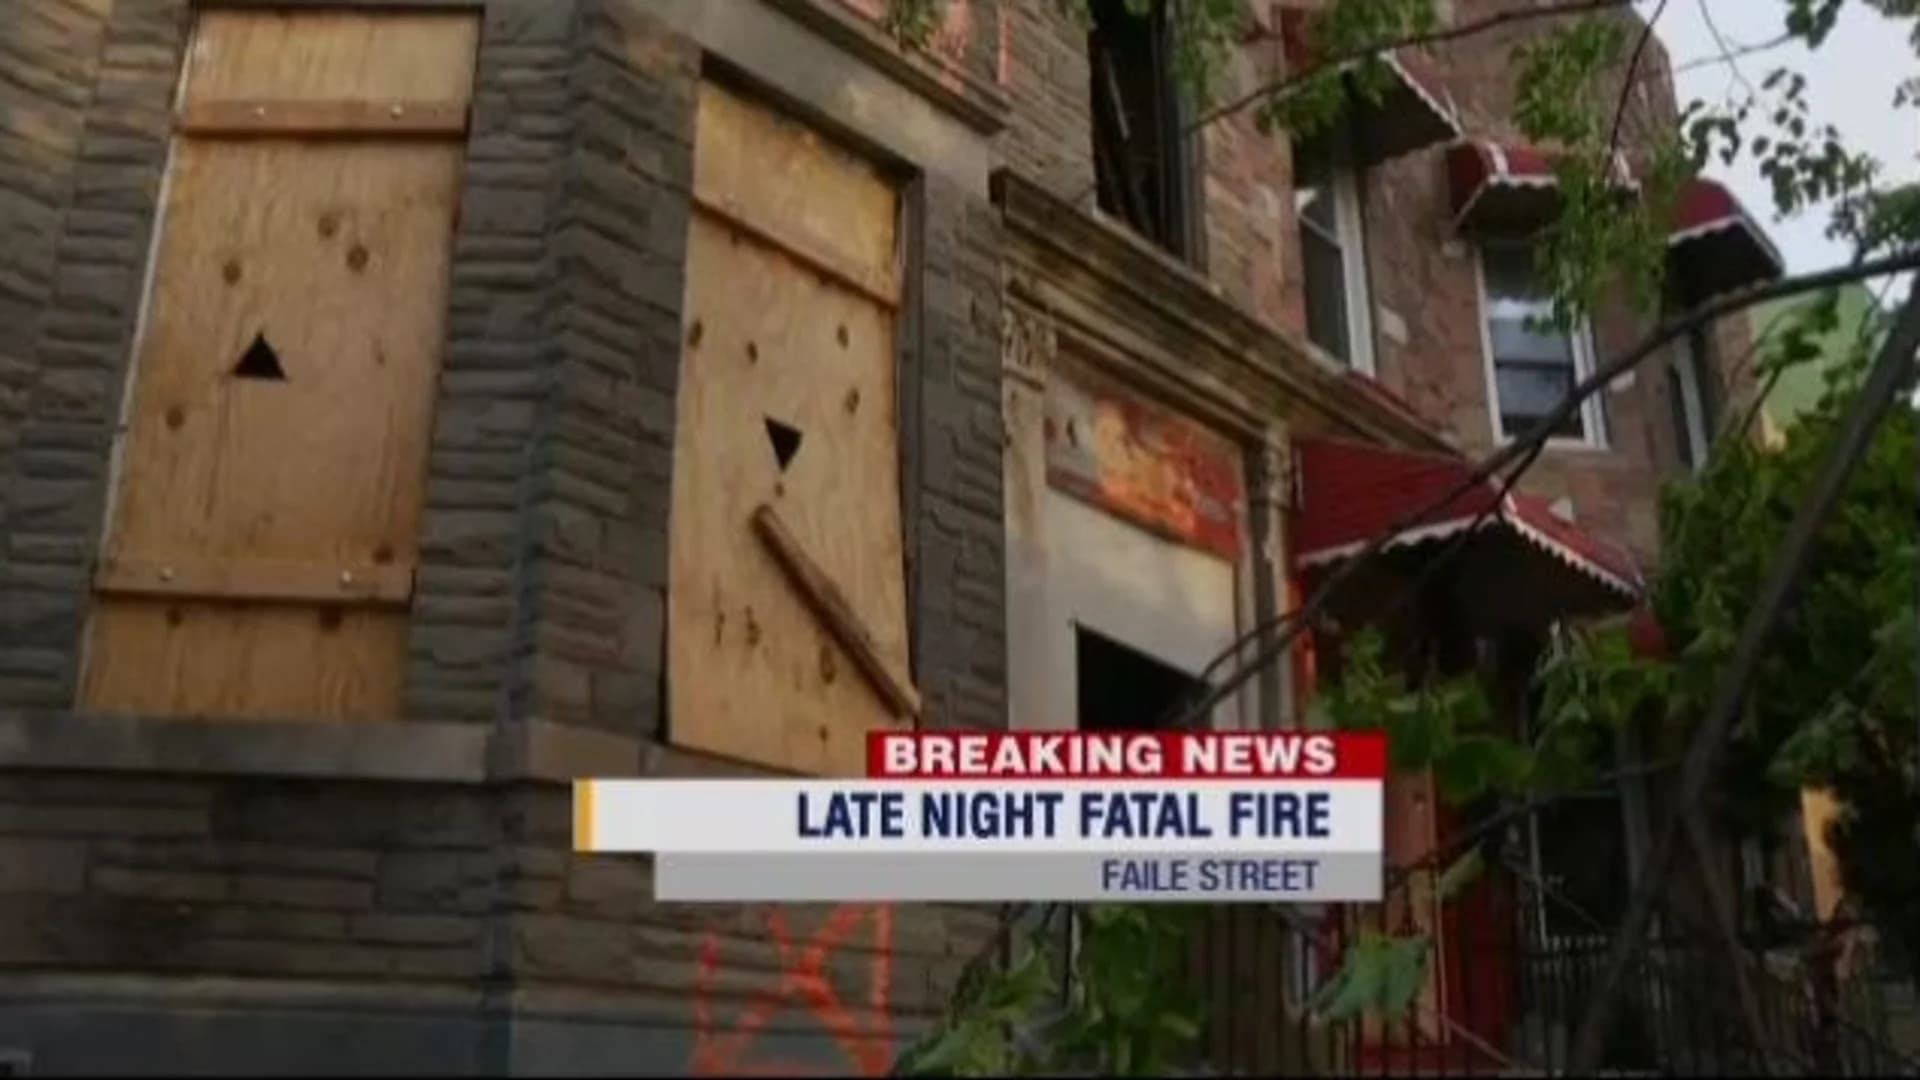 2 dead after fire at abandoned home in Hunts Point